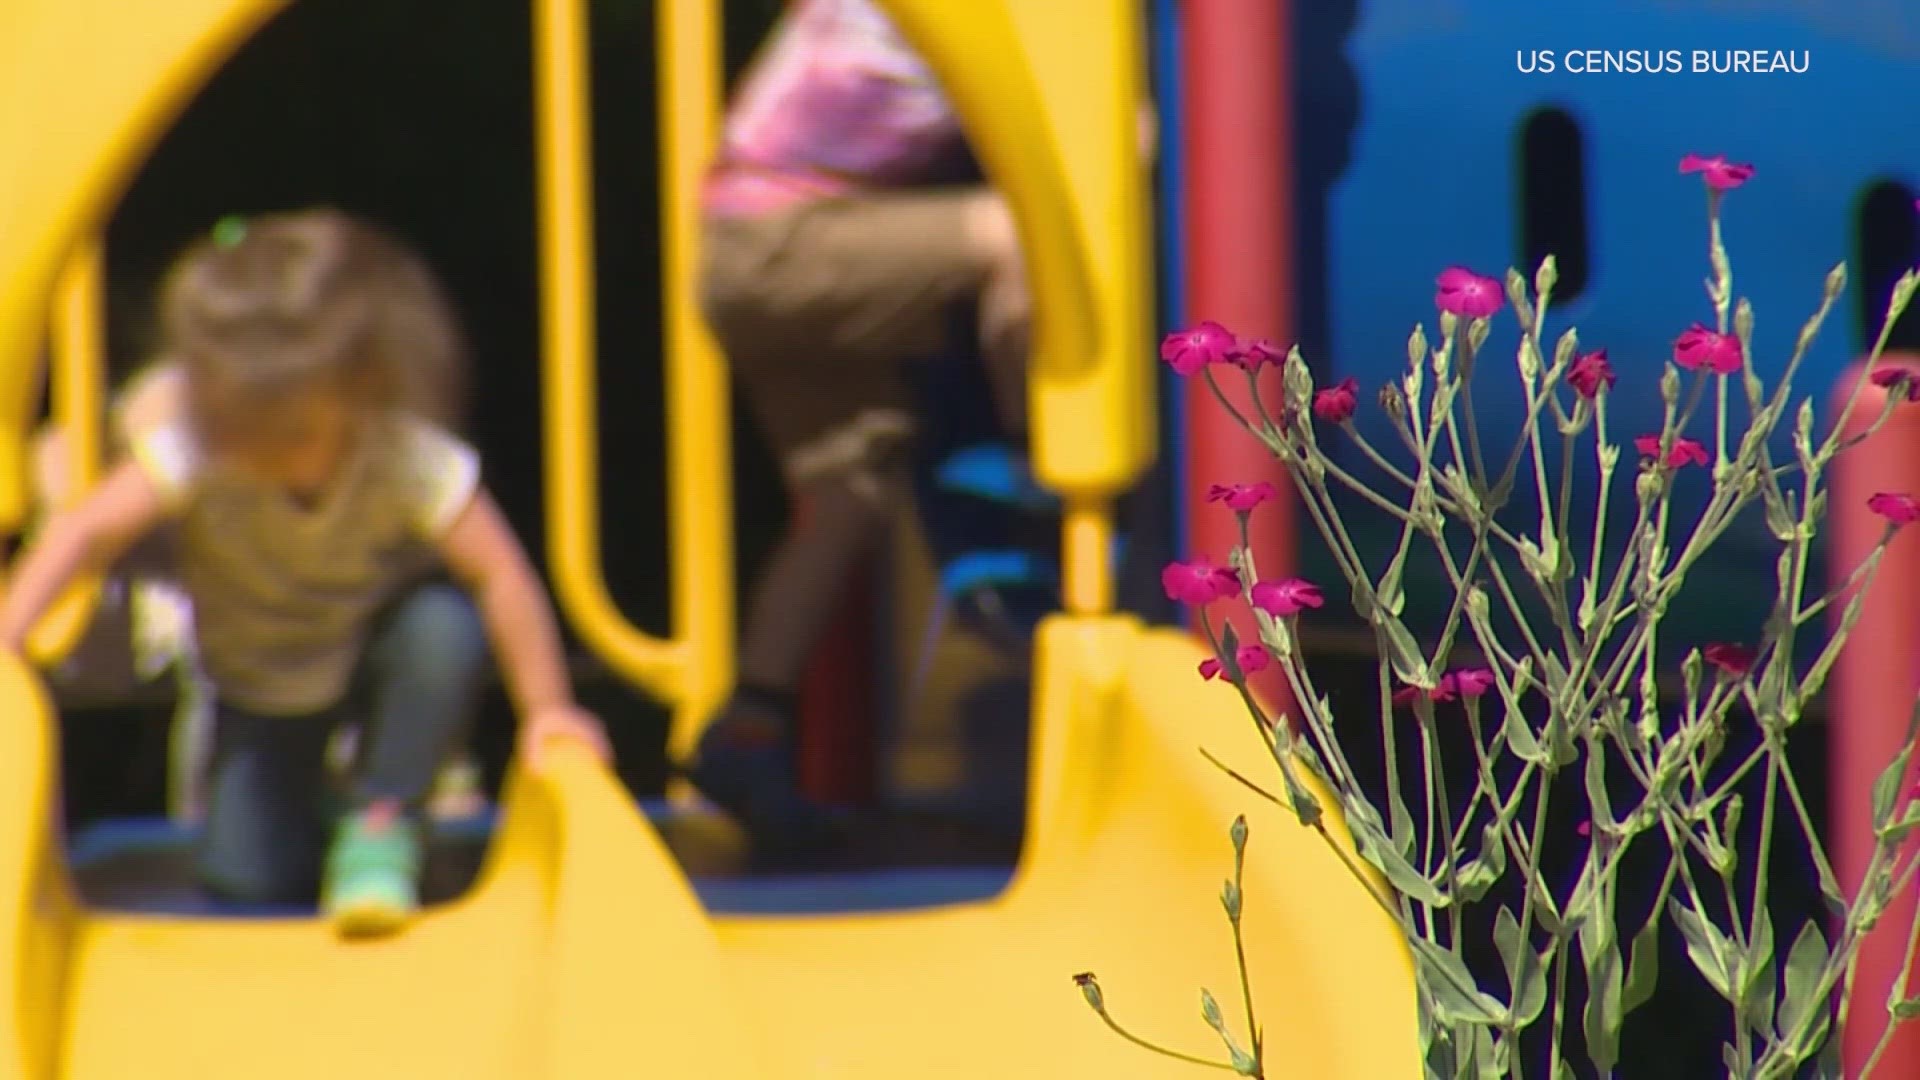 A recently released report says average childcare costs are $2,831 more expensive than estimated UW tuition for the upcoming school year: $14,355 to $11,524.